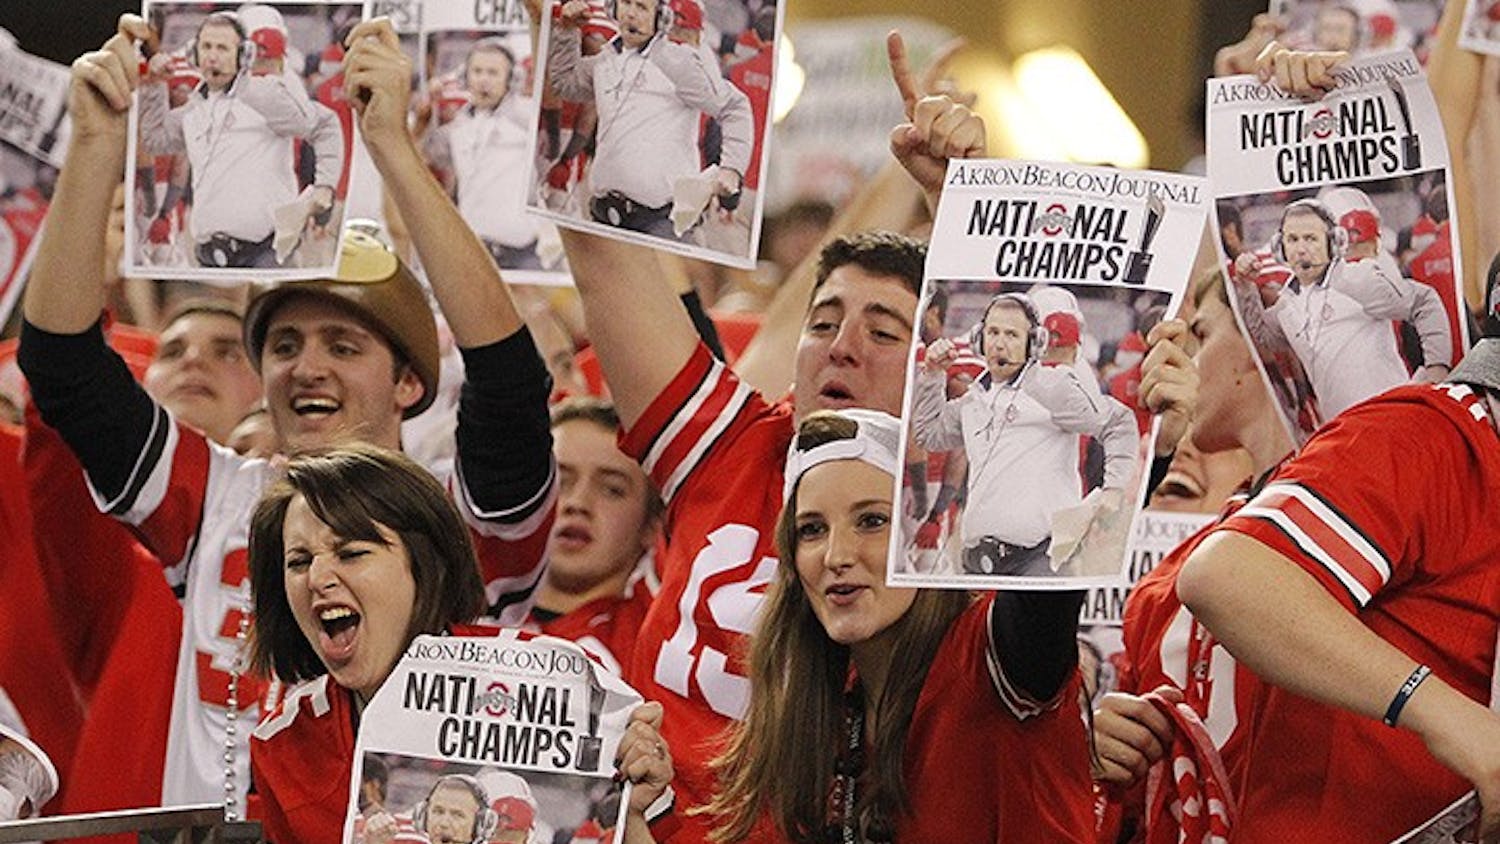 Ohio State fans celebrate after their team&apos;s win against Oregon in the CFP National Championship on Monday, Jan. 12, 2015, at AT&amp;T Stadium in Arlington, Texas. (Paul Moseley/Fort Worth Star-Telegram/TNS)